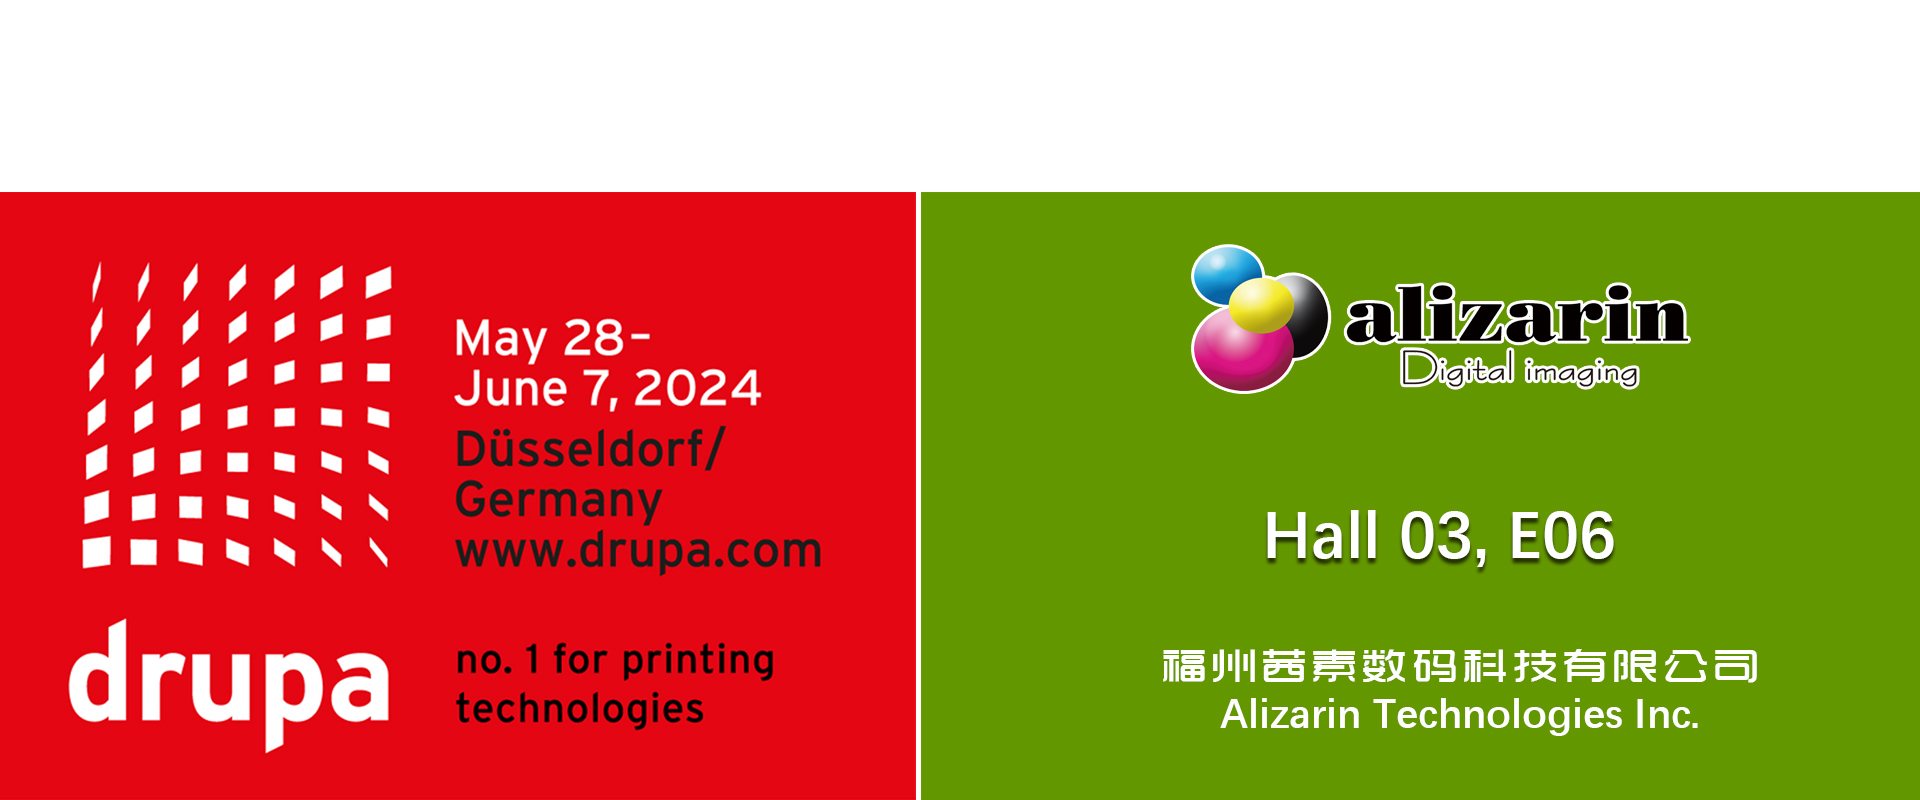 Drupa 2024 in Düsseldorf Germany, Our Booth is Hall 03, E06